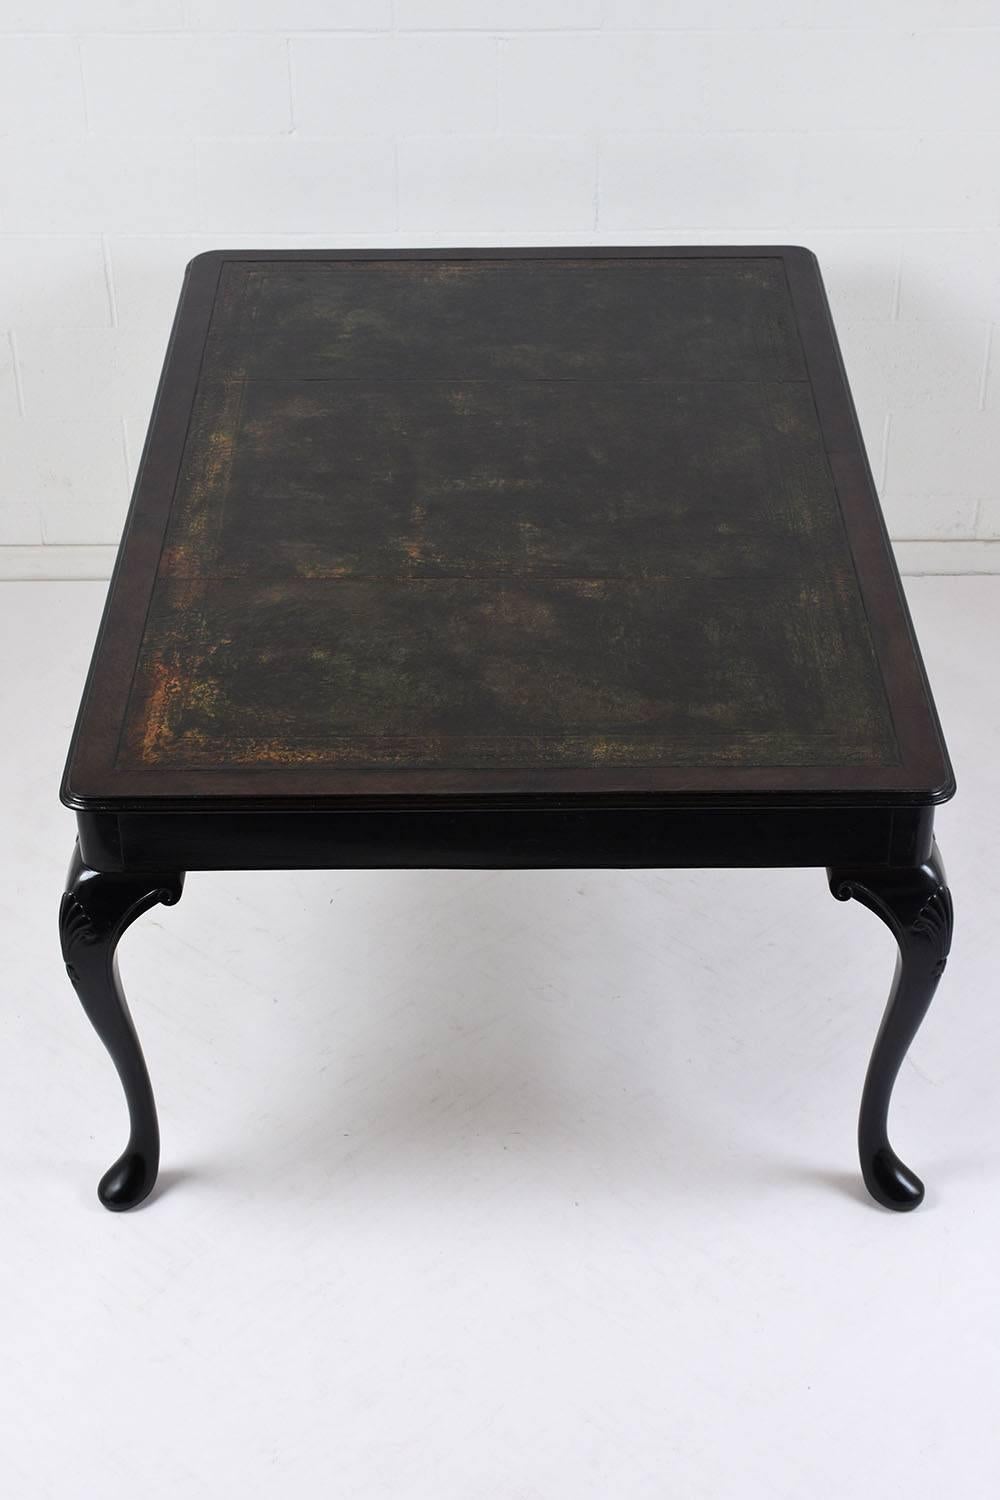 20th Century English Ebonized Partners Desk with Leather Top